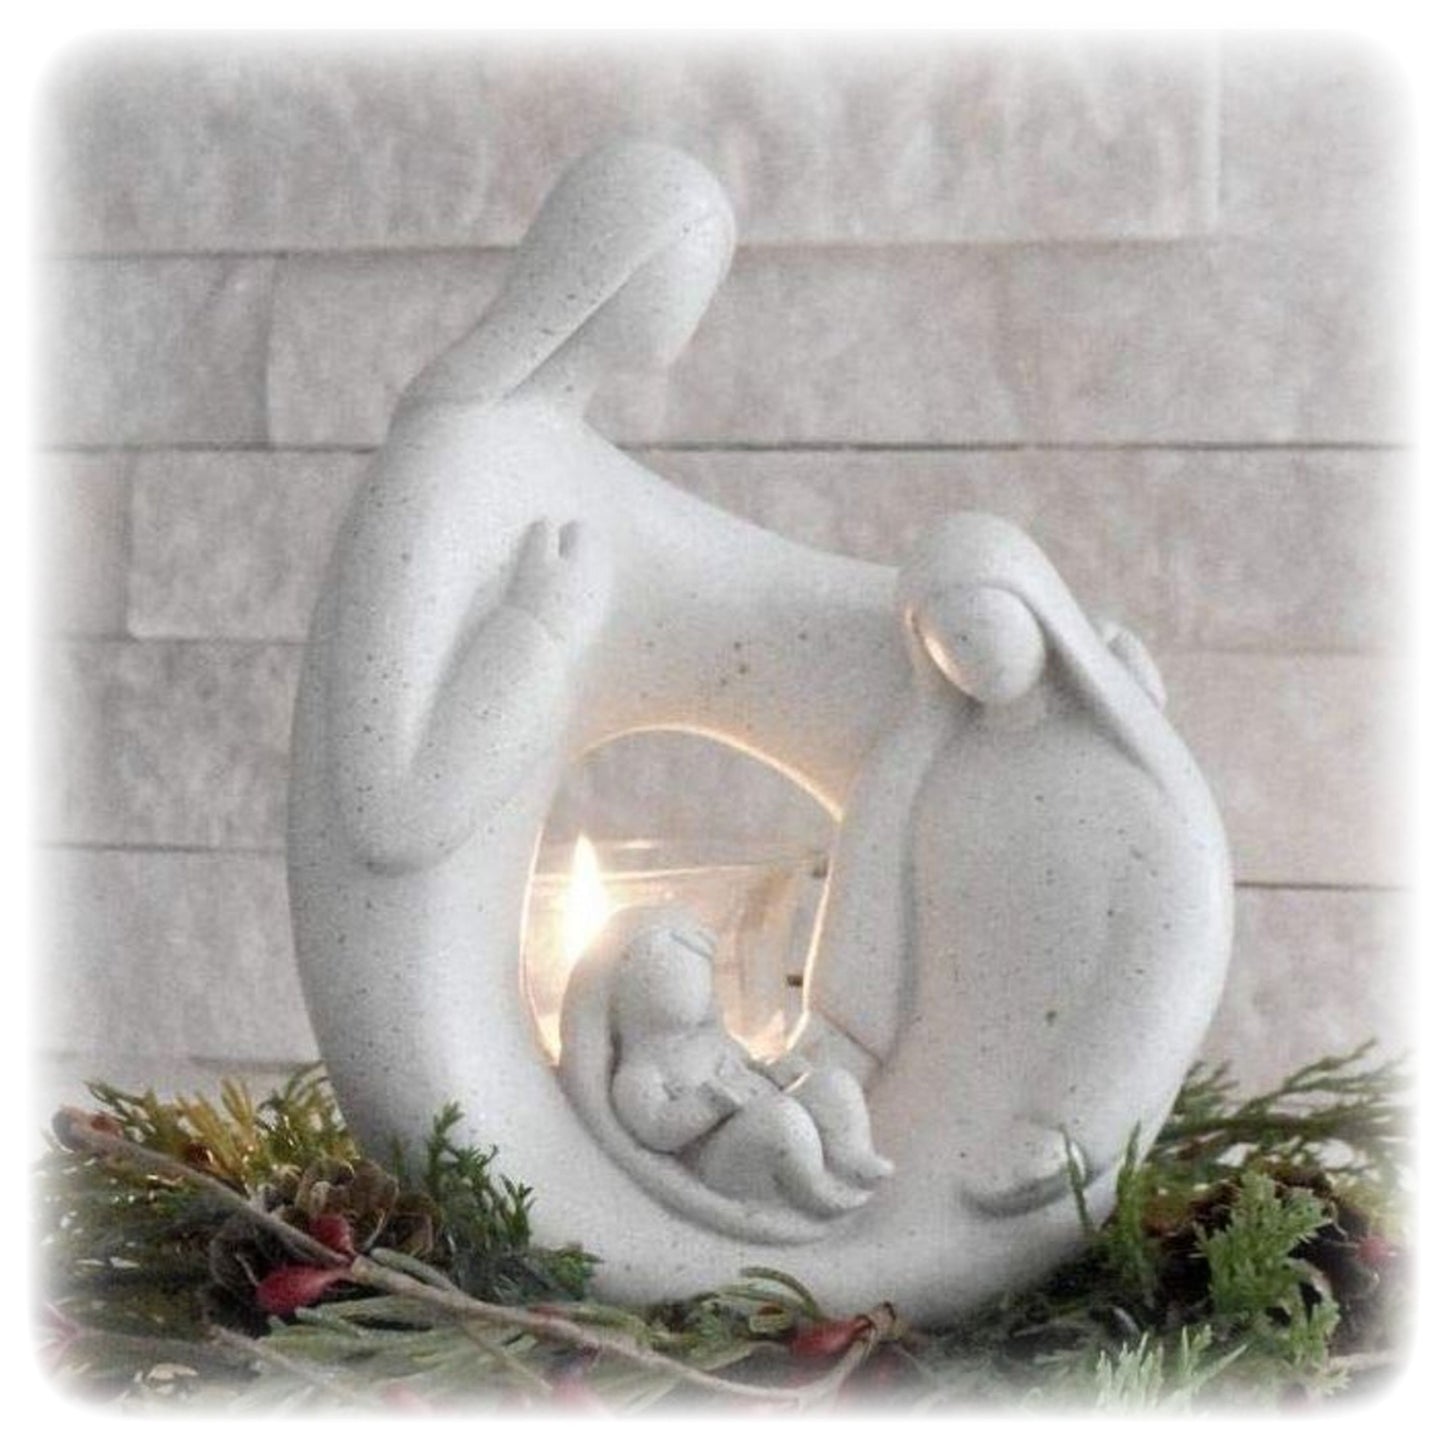 Christmas in Heaven Nativity Memorial Candleholder with LED Candle